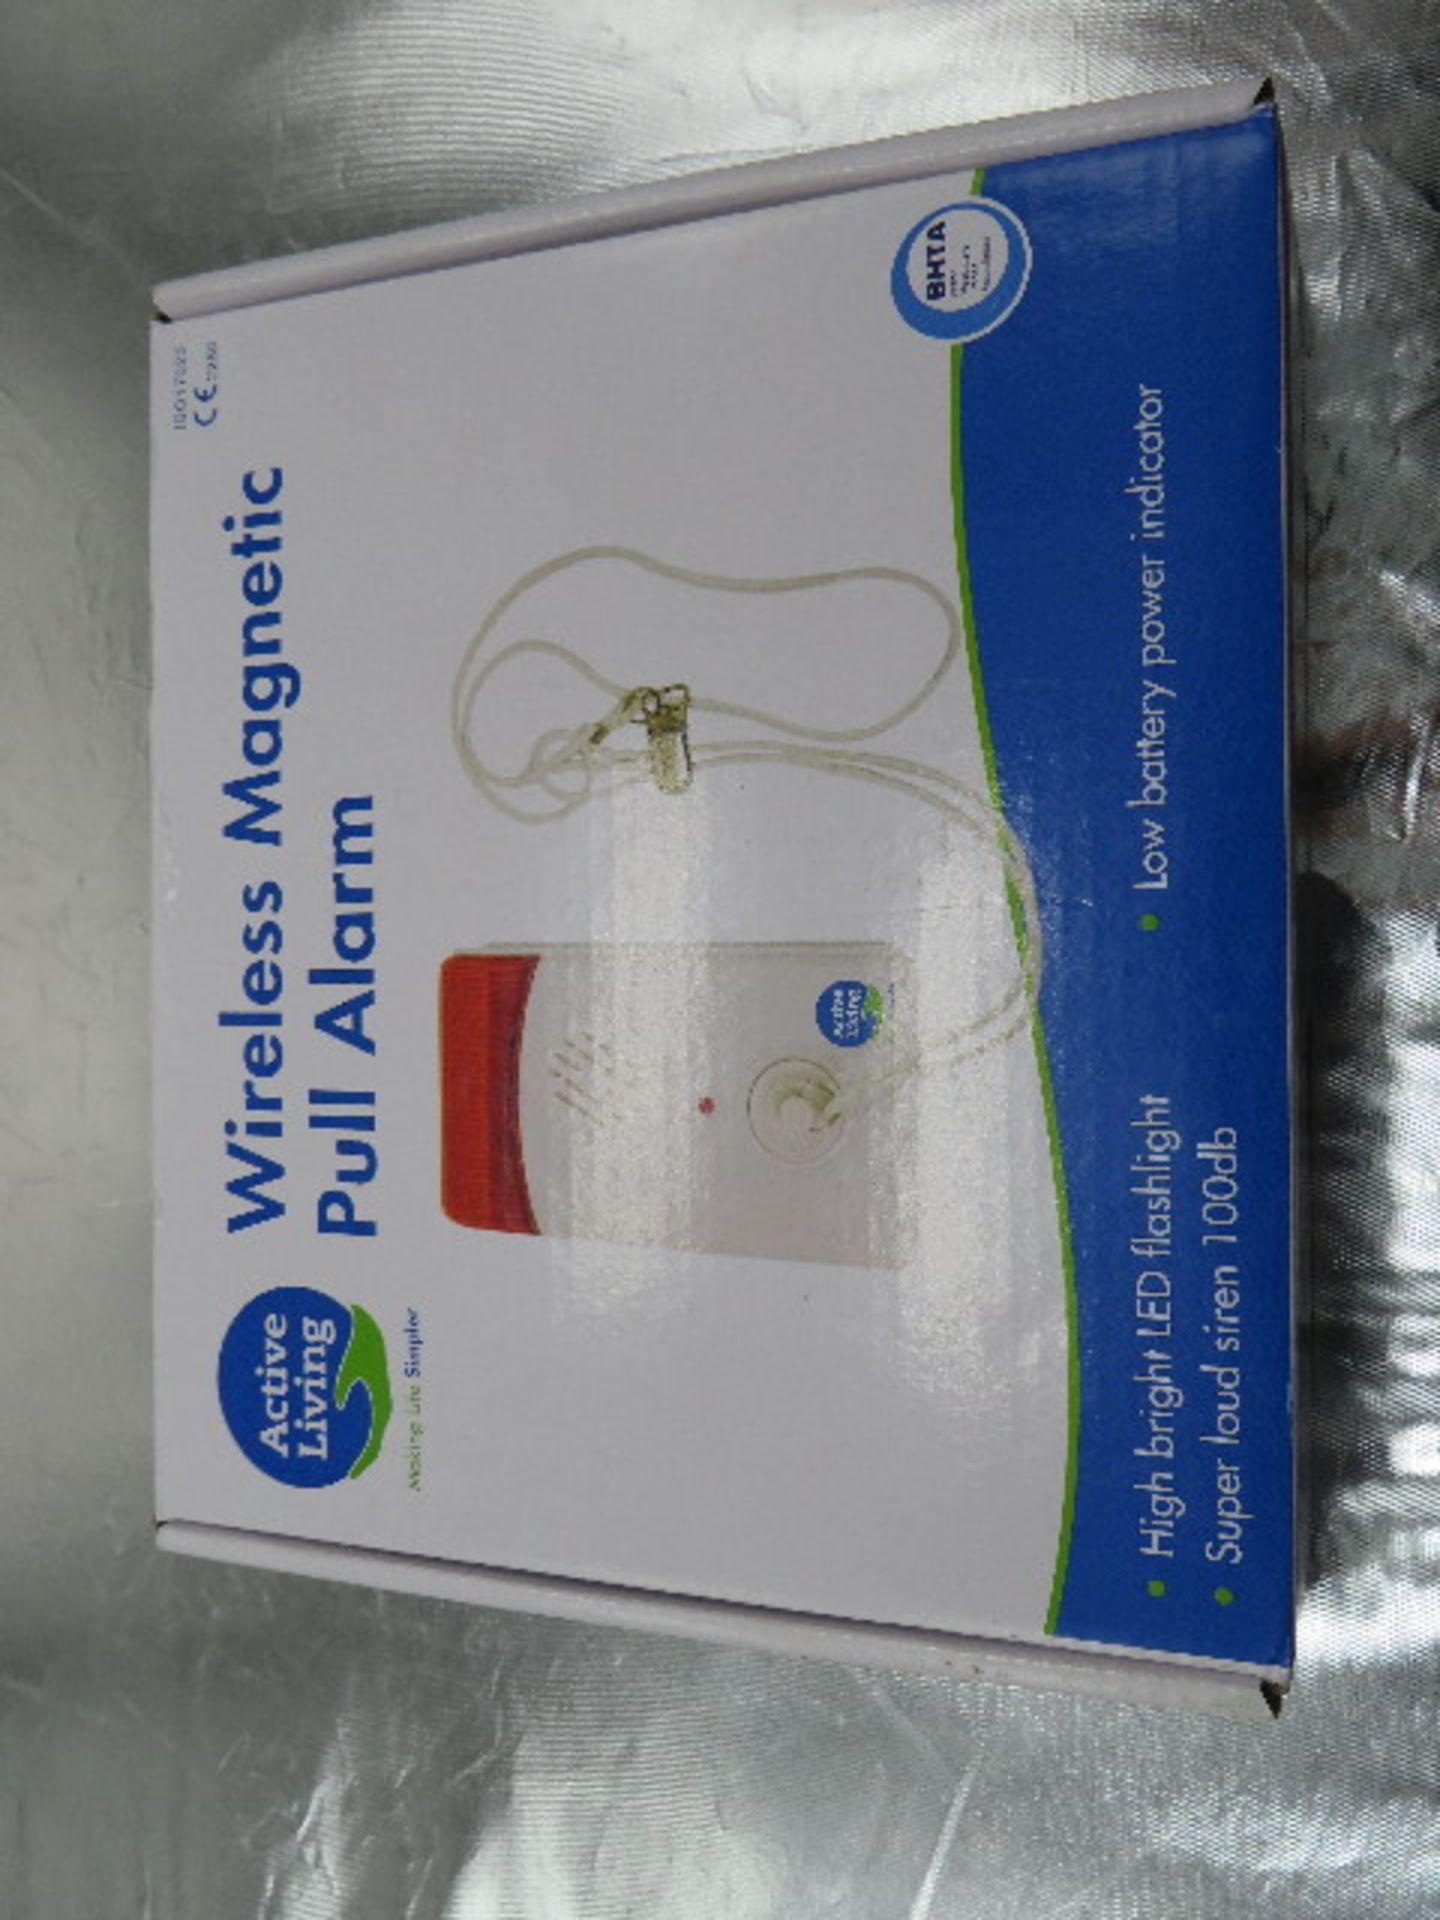 ActiveLiving - Wireless Magnetic Pull Alarm - Unchecked & Boxed.